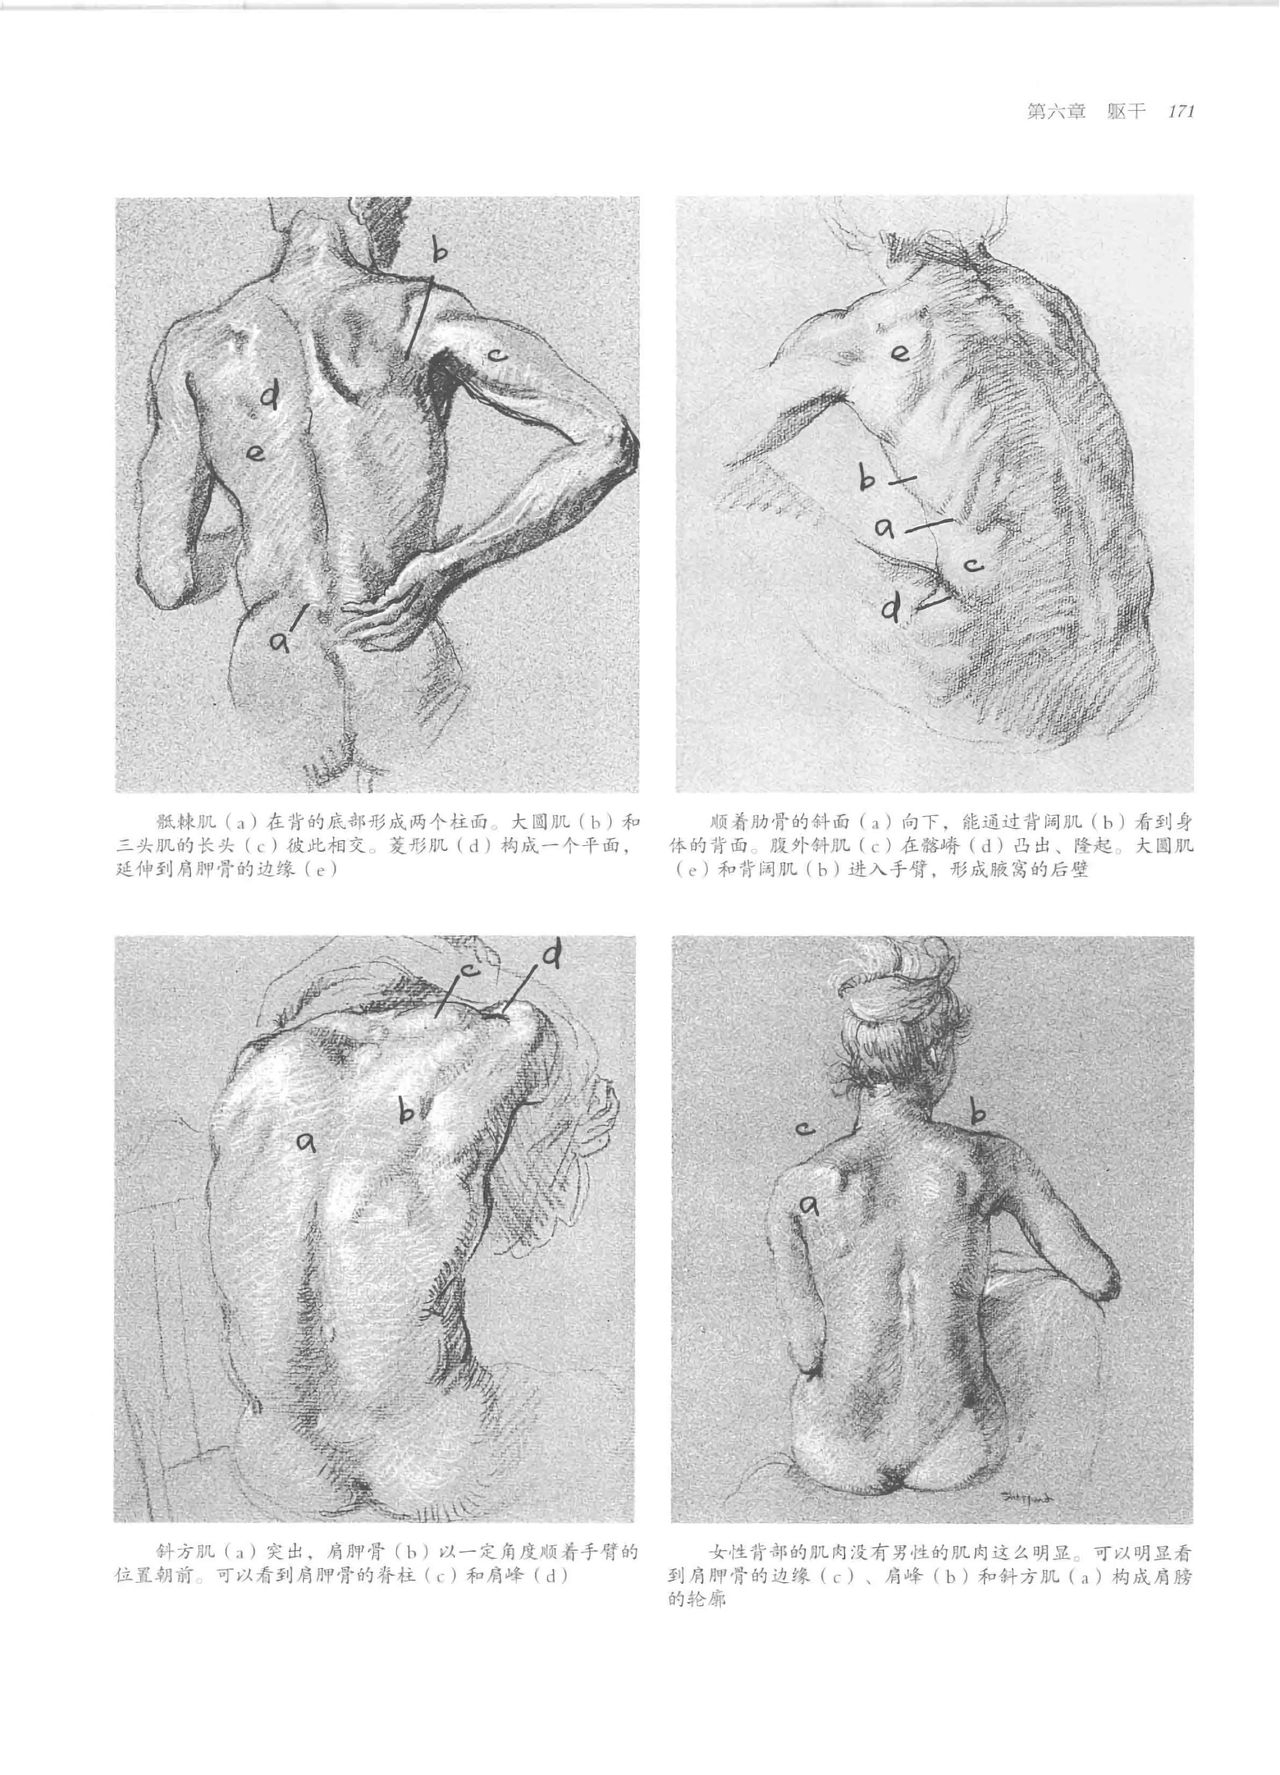 Anatomy-A Complete Guide for Artists - Joseph Sheppard [Chinese] 171